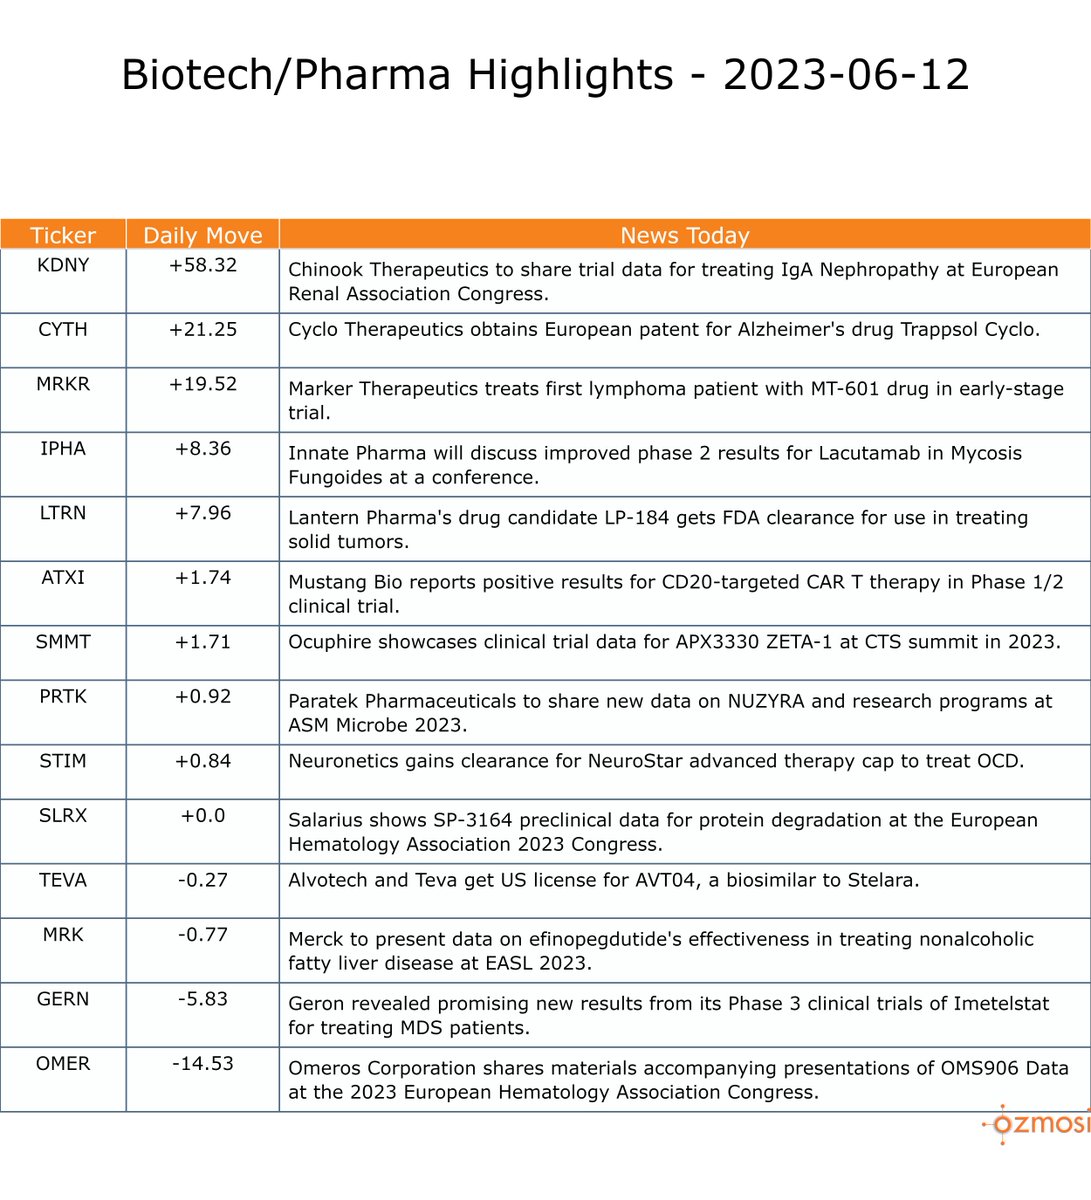 Pharma/Biotech Highlights:

$BSPM: Biostar Pharma enrolls patient in trial.
$GERN: Geron's Imetelstat shows promise in MDS.
$PRTK: Paratek Pharmaceuticals shares NUZYRA data.
$PVTTF: Trial shows MRI and biomarker accuracy.
$IDRSF: Idorsia launches QUVIVIQ for insomnia relief.